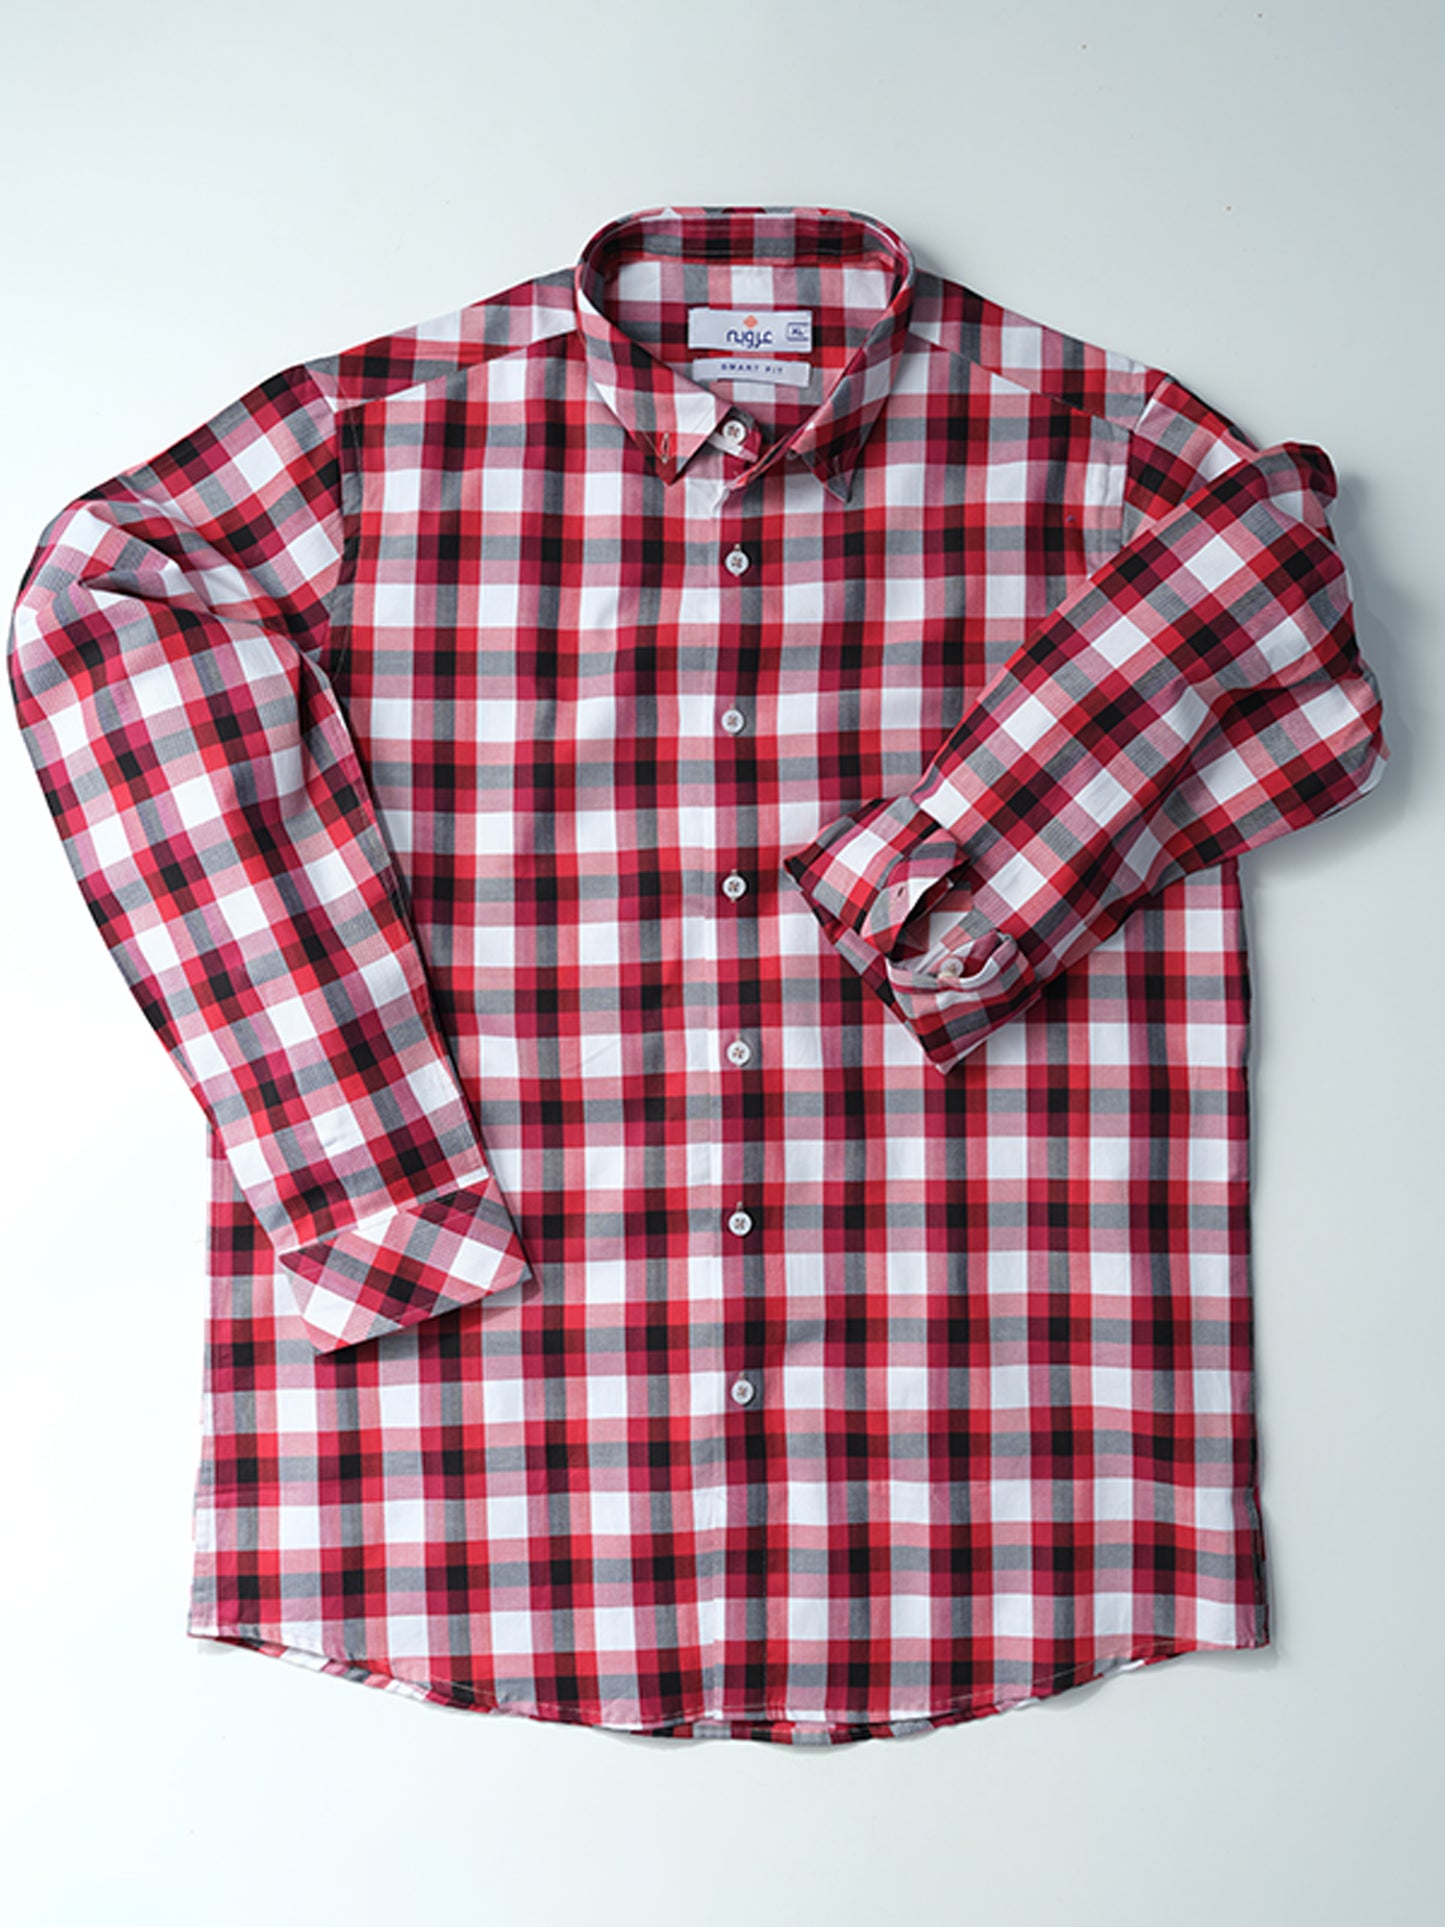 RED AND WHITE CHECK SHIRT FOR MEN 2